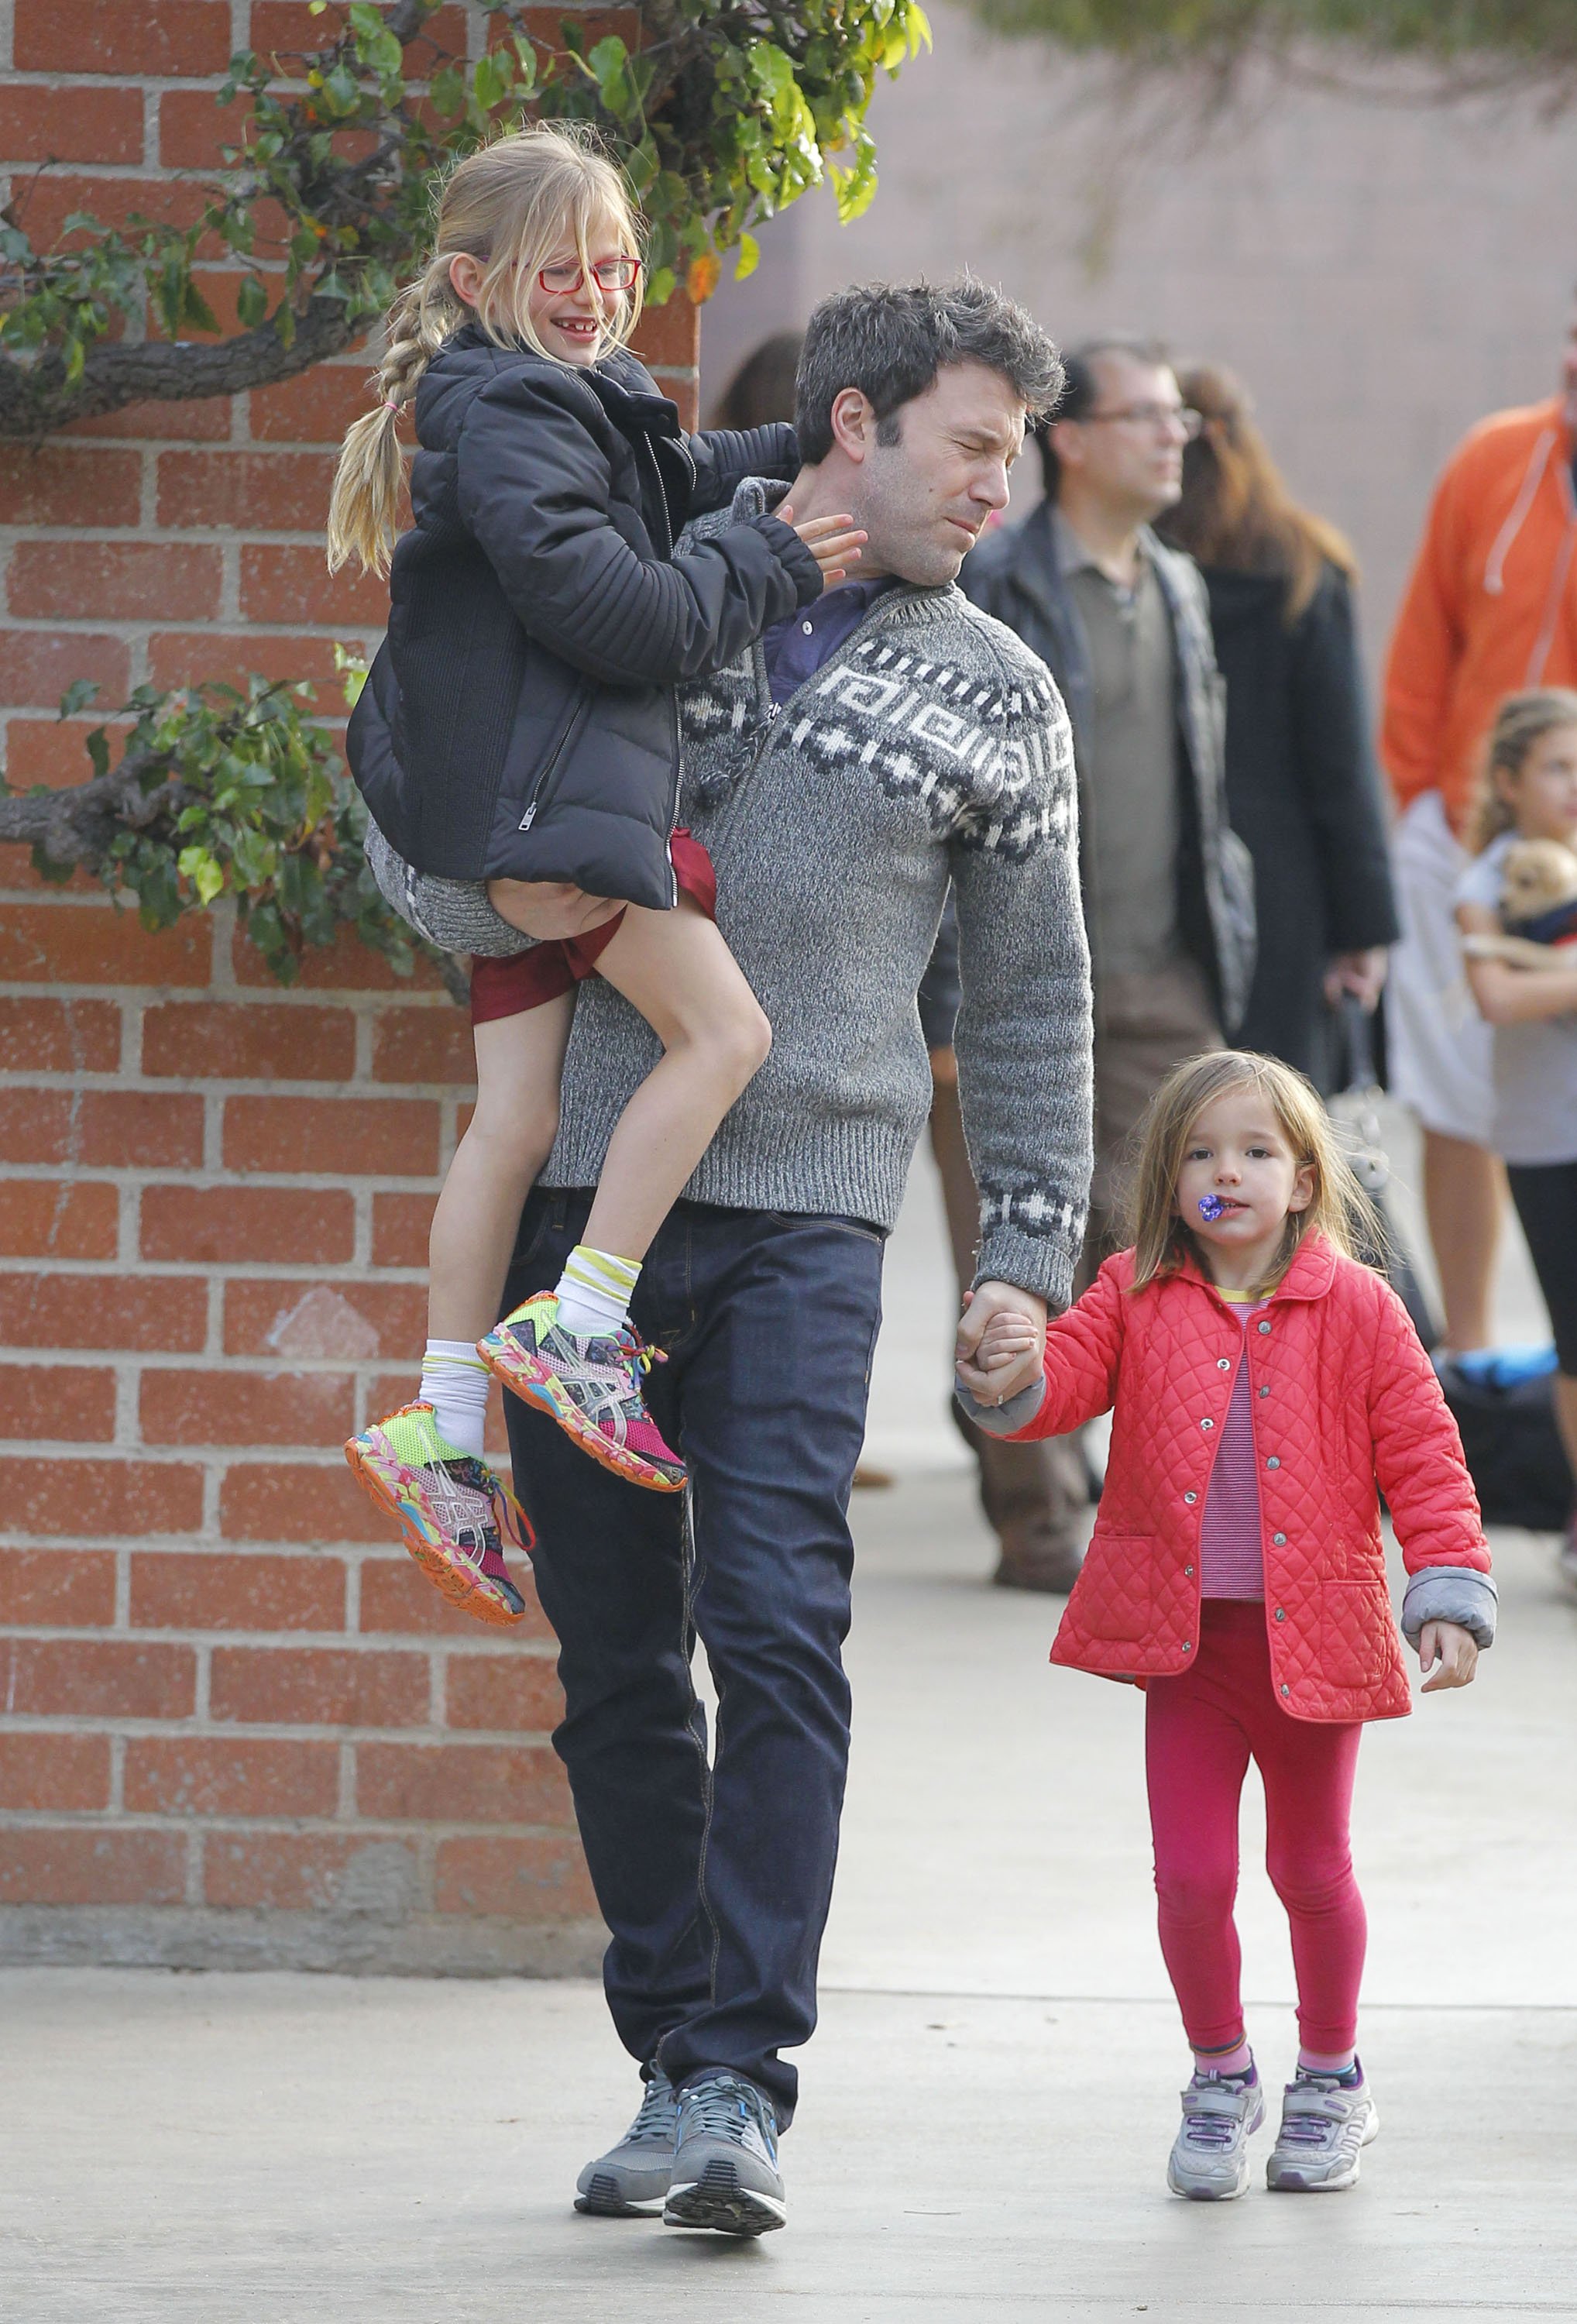 Ben Affleck and his daughters, Violet and Seraphina Affleck, leaving the park on December 08, 2013 in Los Angeles, California | Source: Getty Images